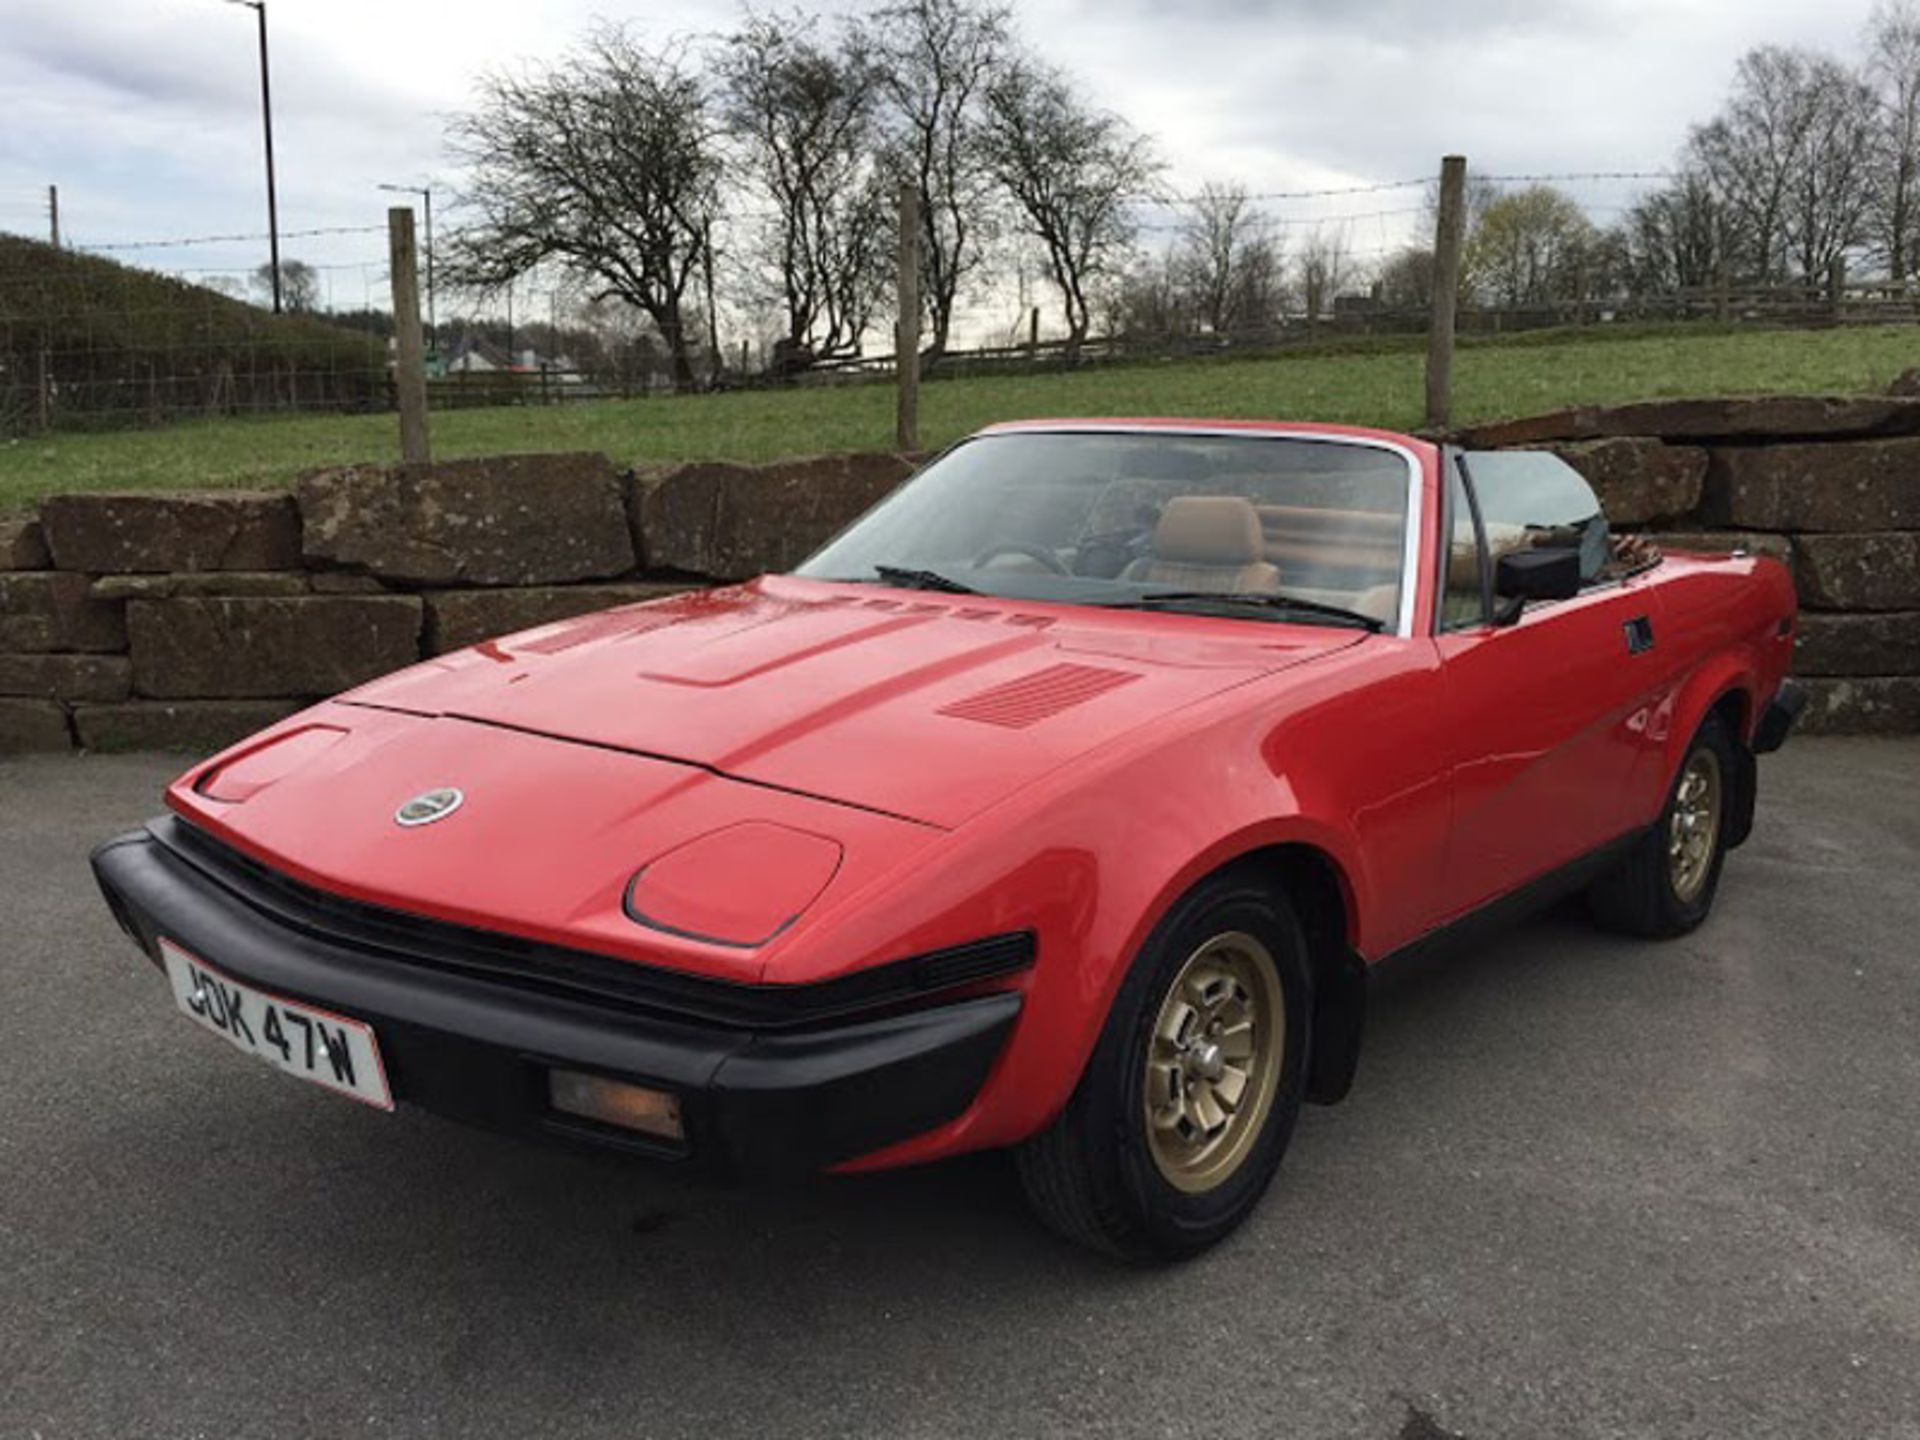 - Offered from long-term Triumph enthusiast ownership

- 87,000 recorded miles, MOT'd into April